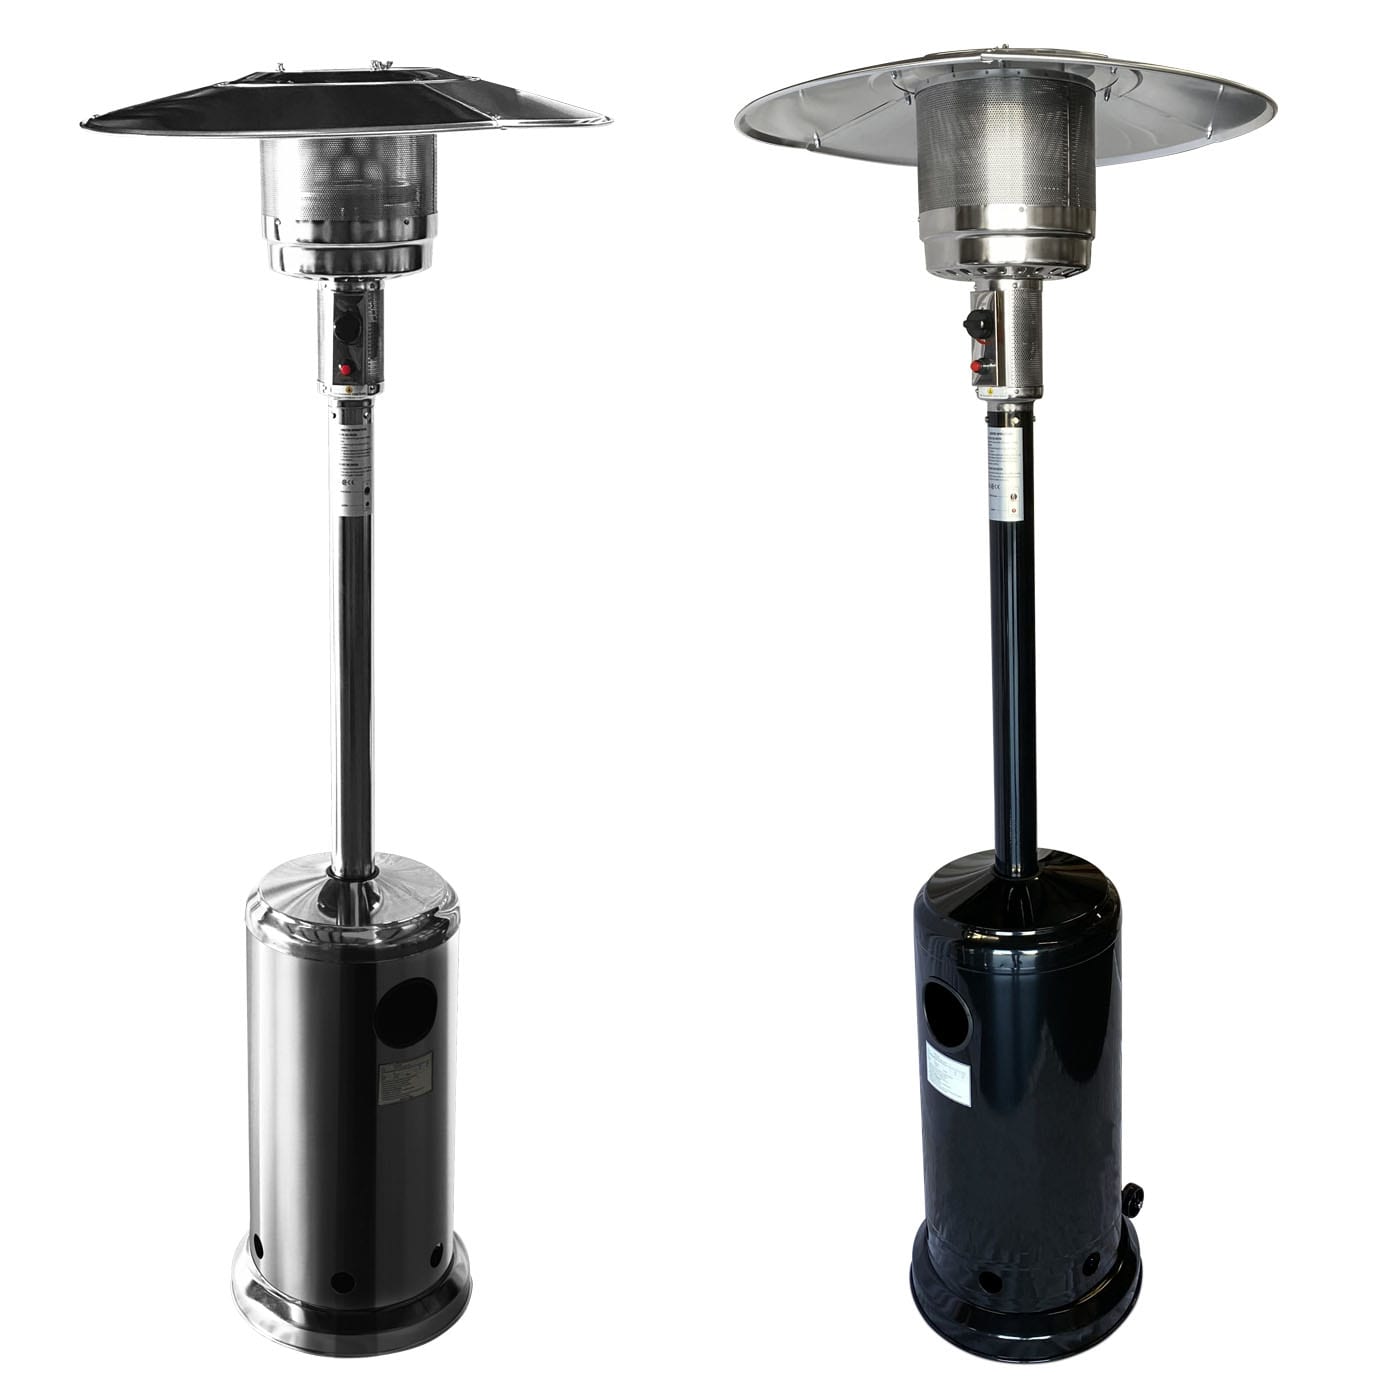 High-Quality Patio Heaters